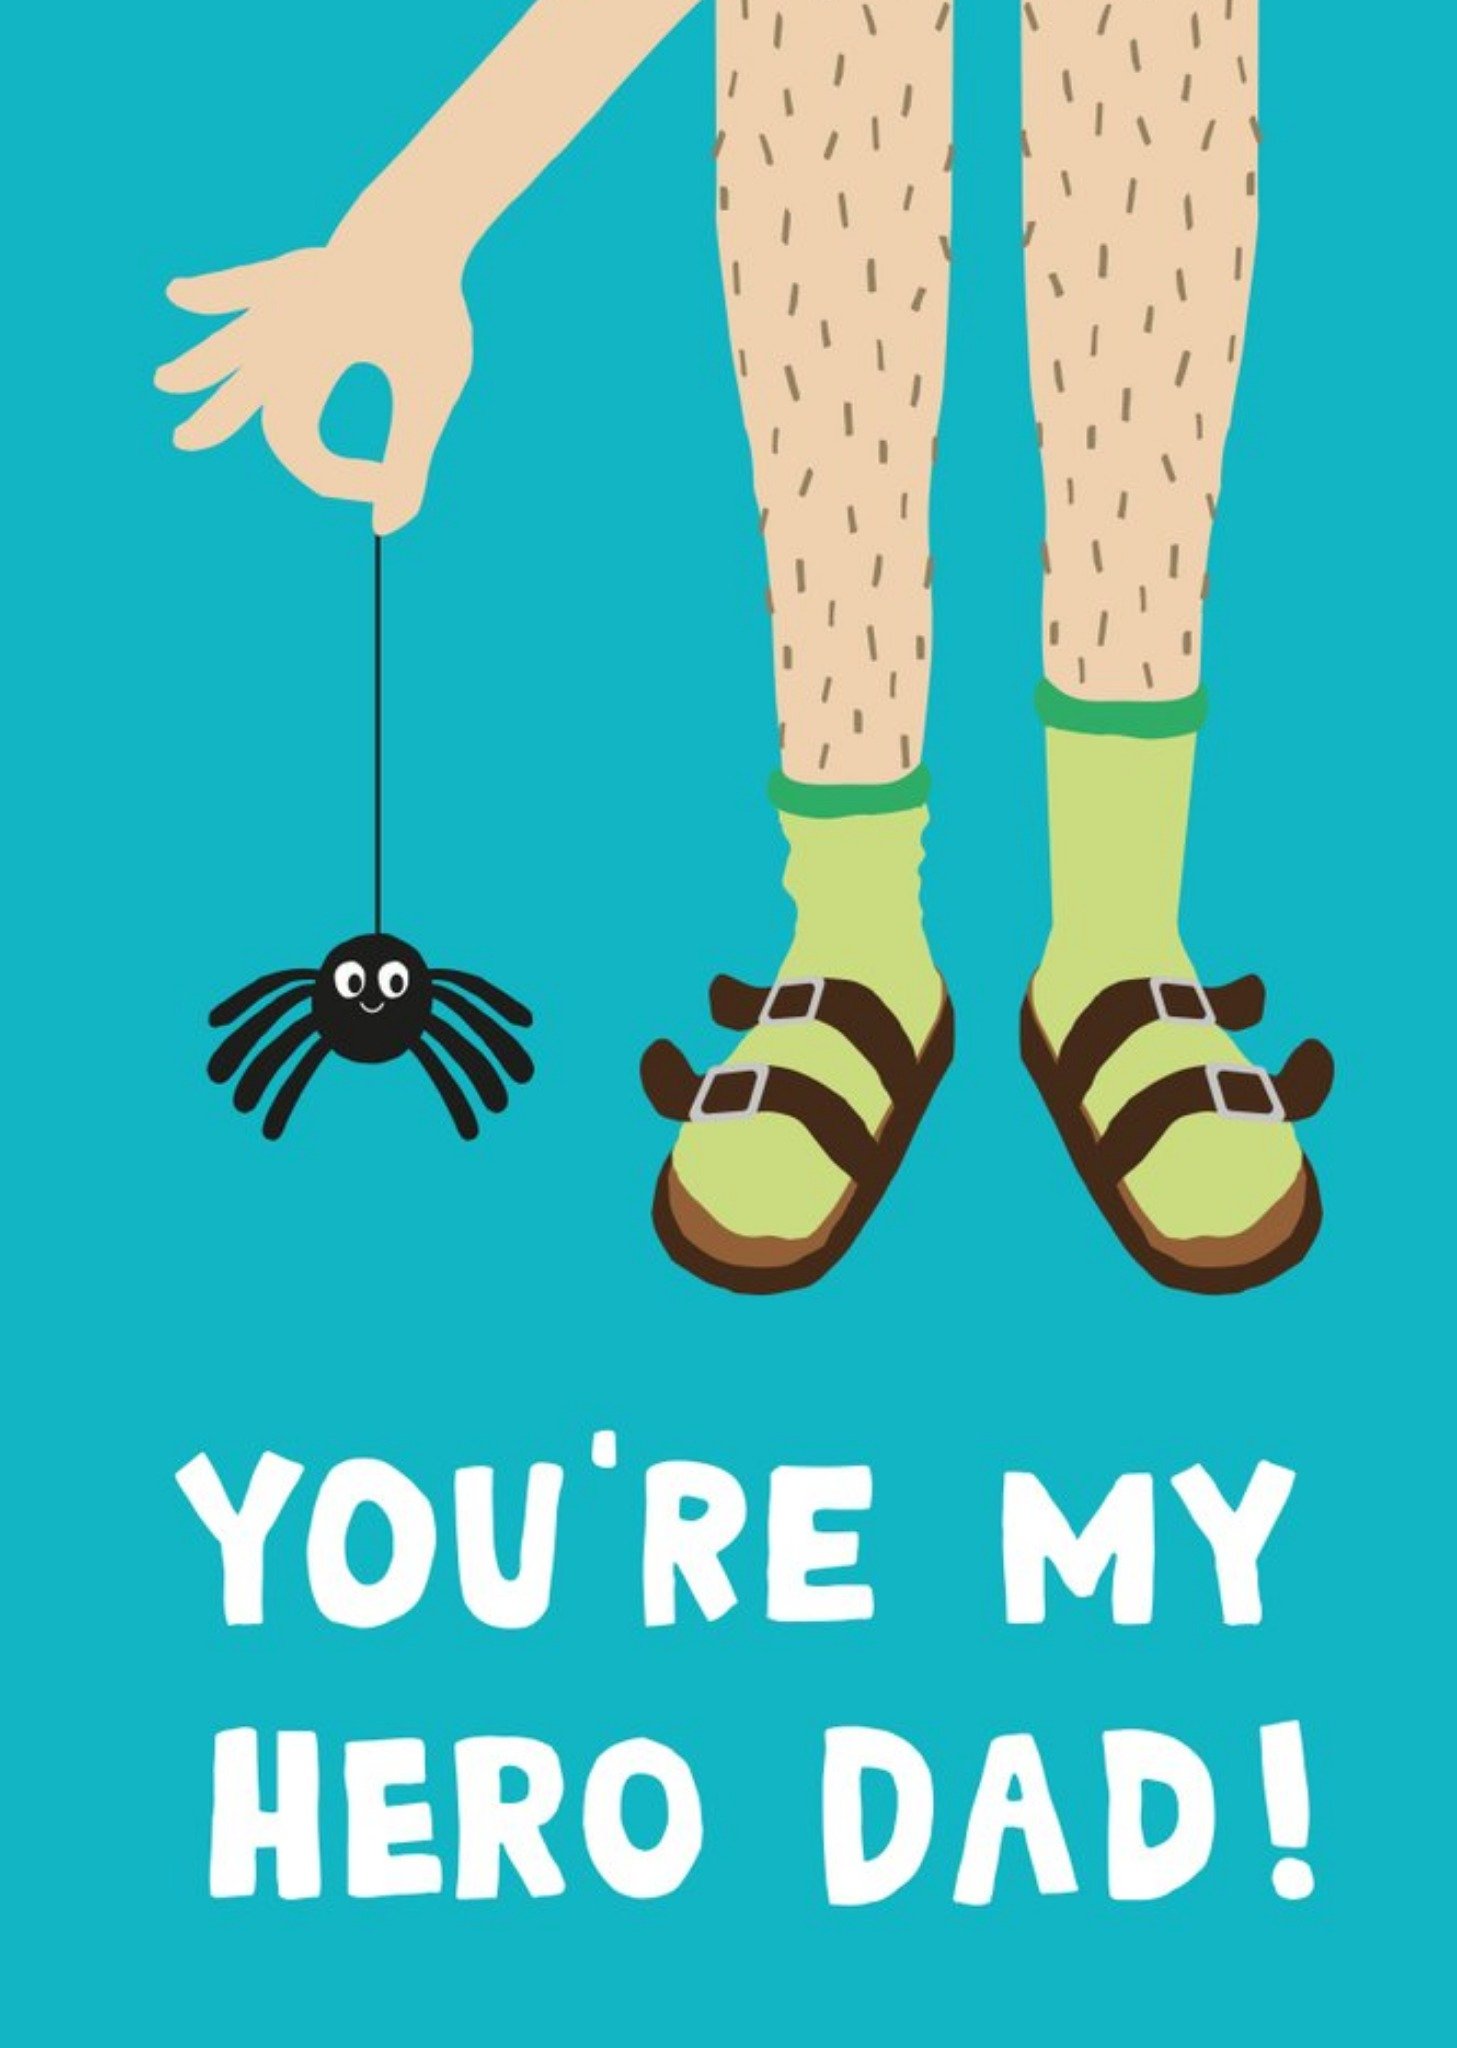 Moonpig Illustration Of A Man Catching A Spider Father's Day Card Ecard